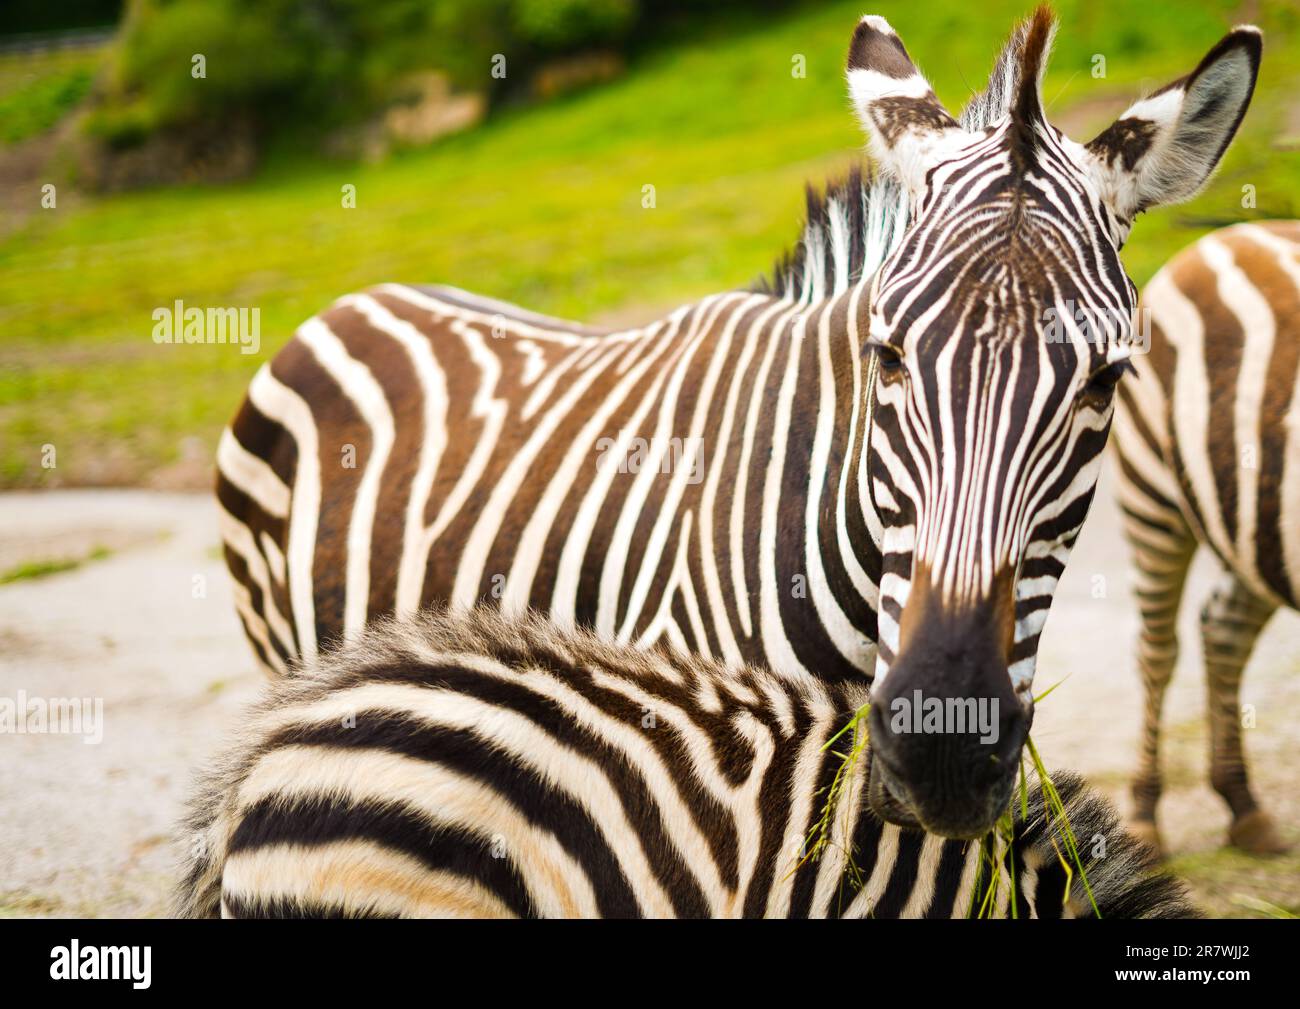 Zebra looking at Camara with her son underneath, in Cabarceno park, Spain Stock Photo